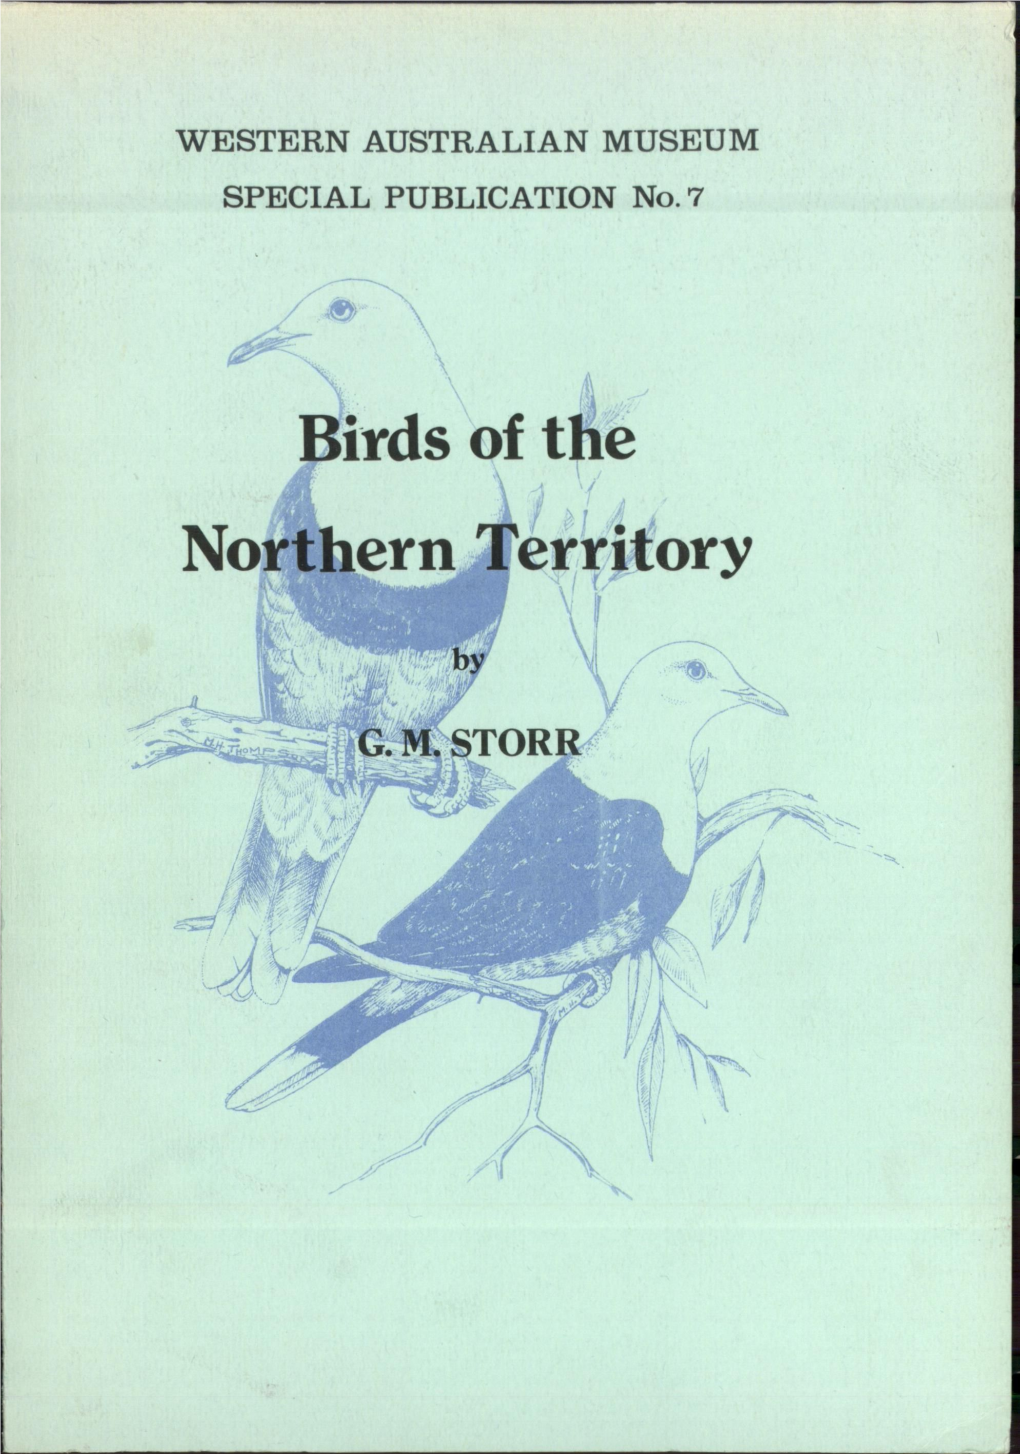 Birds of the Northern Territory